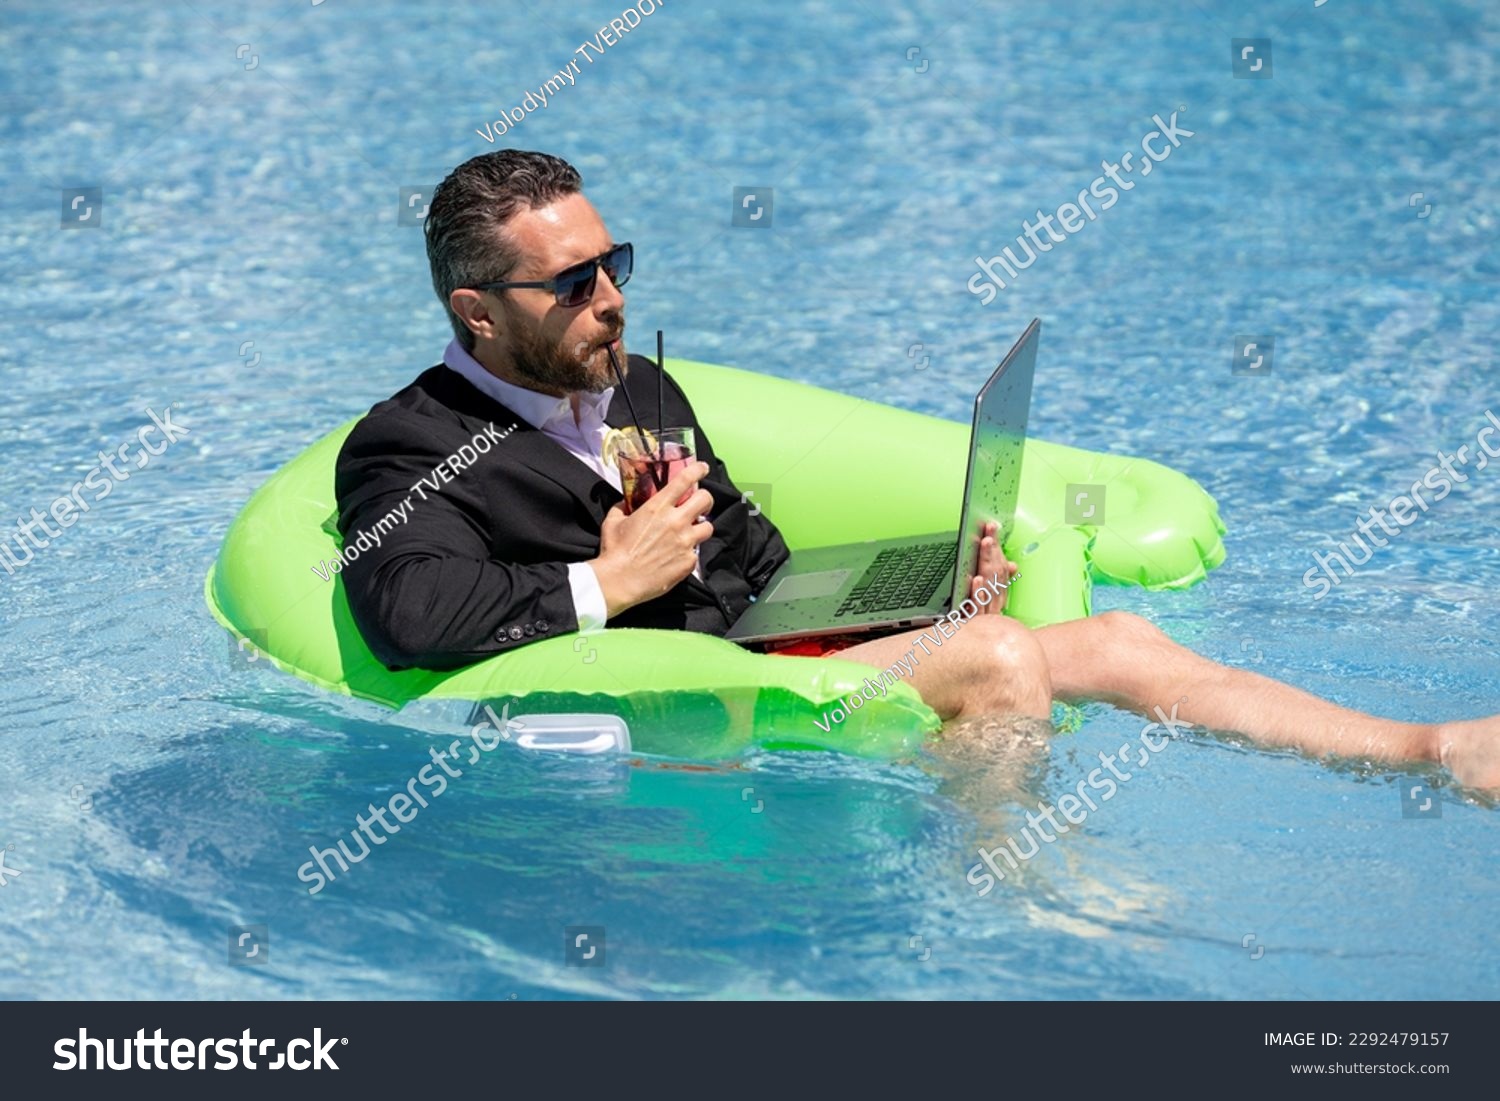 Summer business dreams. Business man in suit floating with cocktail and laptop in swimming pool. Summer business vacation. Funny crazy businessman rest in formal wear in pool. Hot summer business. #2292479157